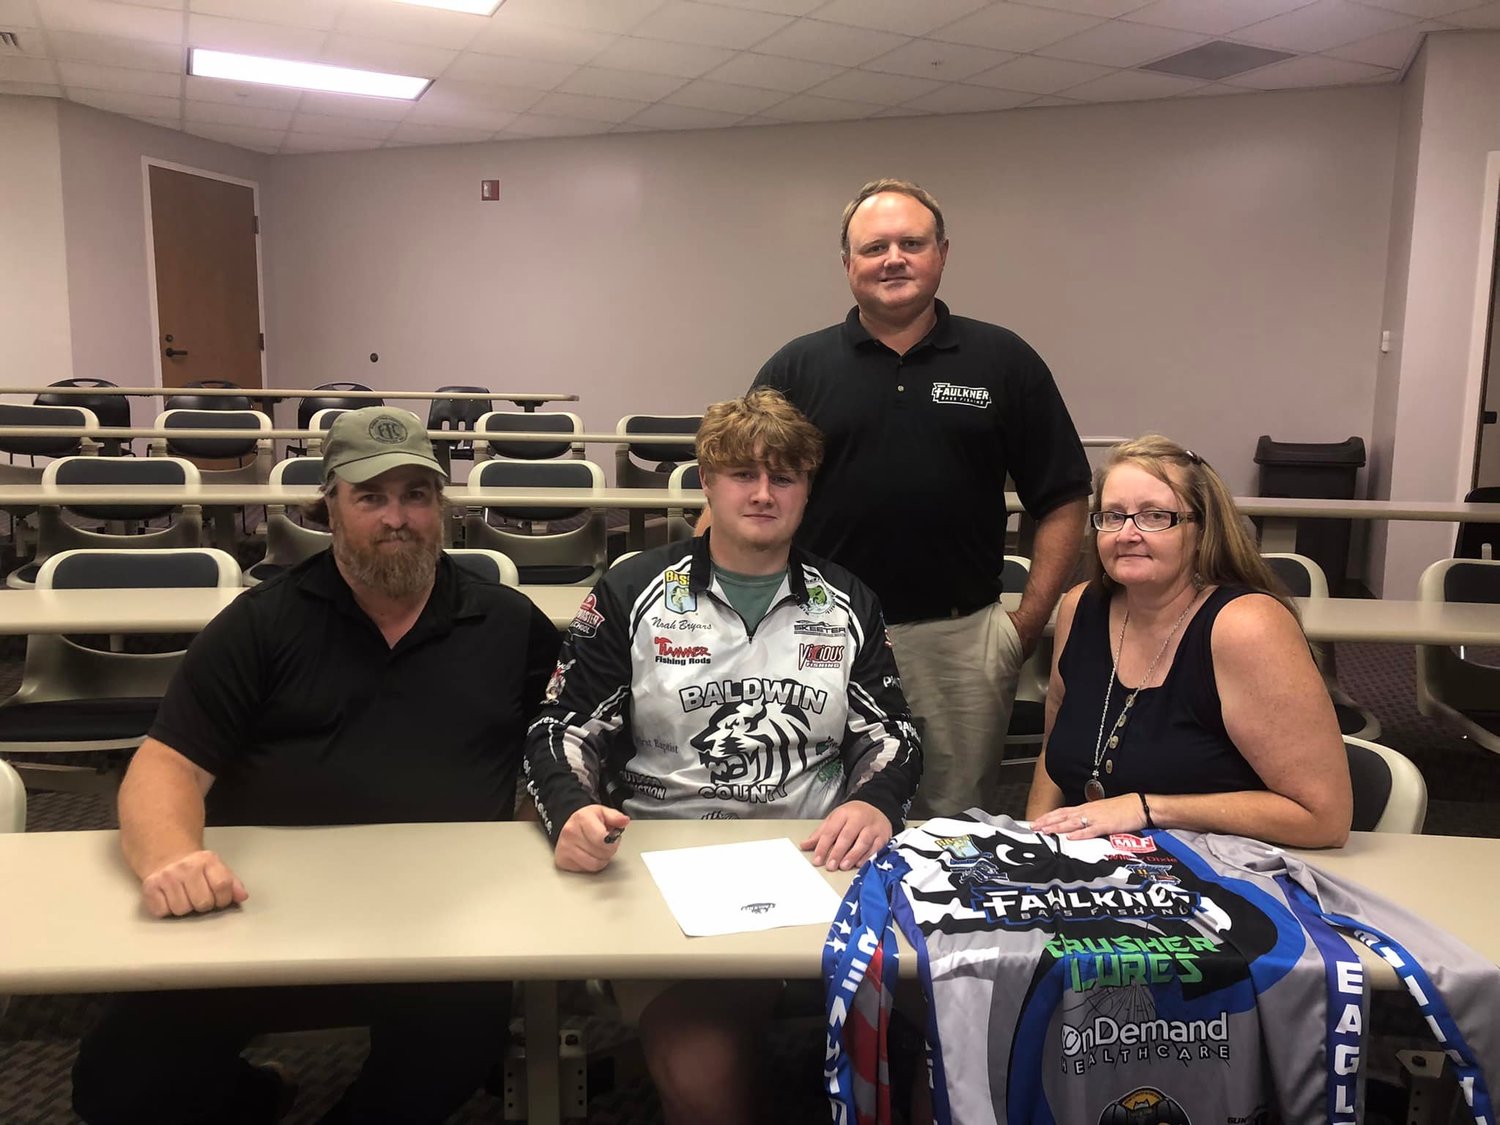 Noah Bryars signed with the Faulkner University bass fishing team to continue his angling career. The recent Baldwin County High School graduate also used top marks at the state championship to qualify for nationals.